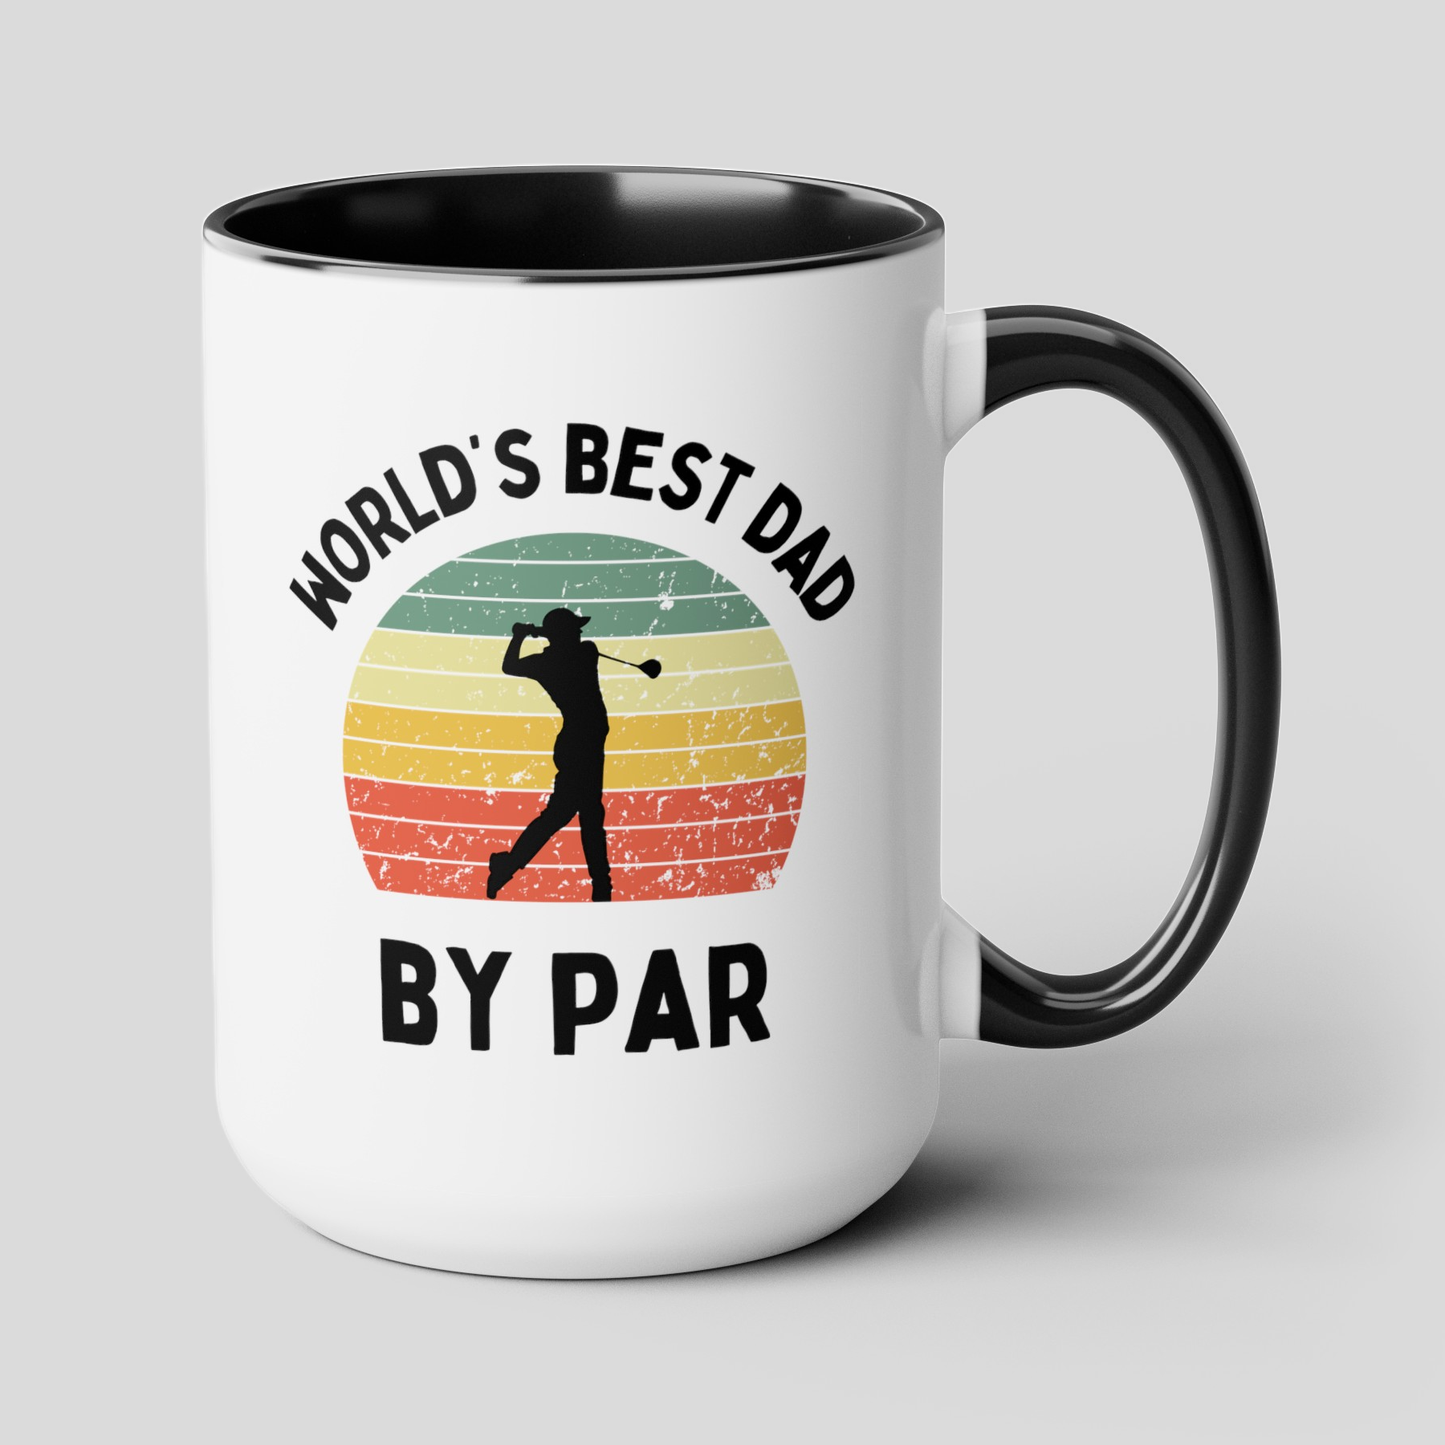 World's Best Dad By Par 15oz white with with black accent large big funny coffee mug tea cup gift for him golfer vintage sunset golf men him pops father's day birthday christmas waveywares wavey wares wavywares wavy wares cover